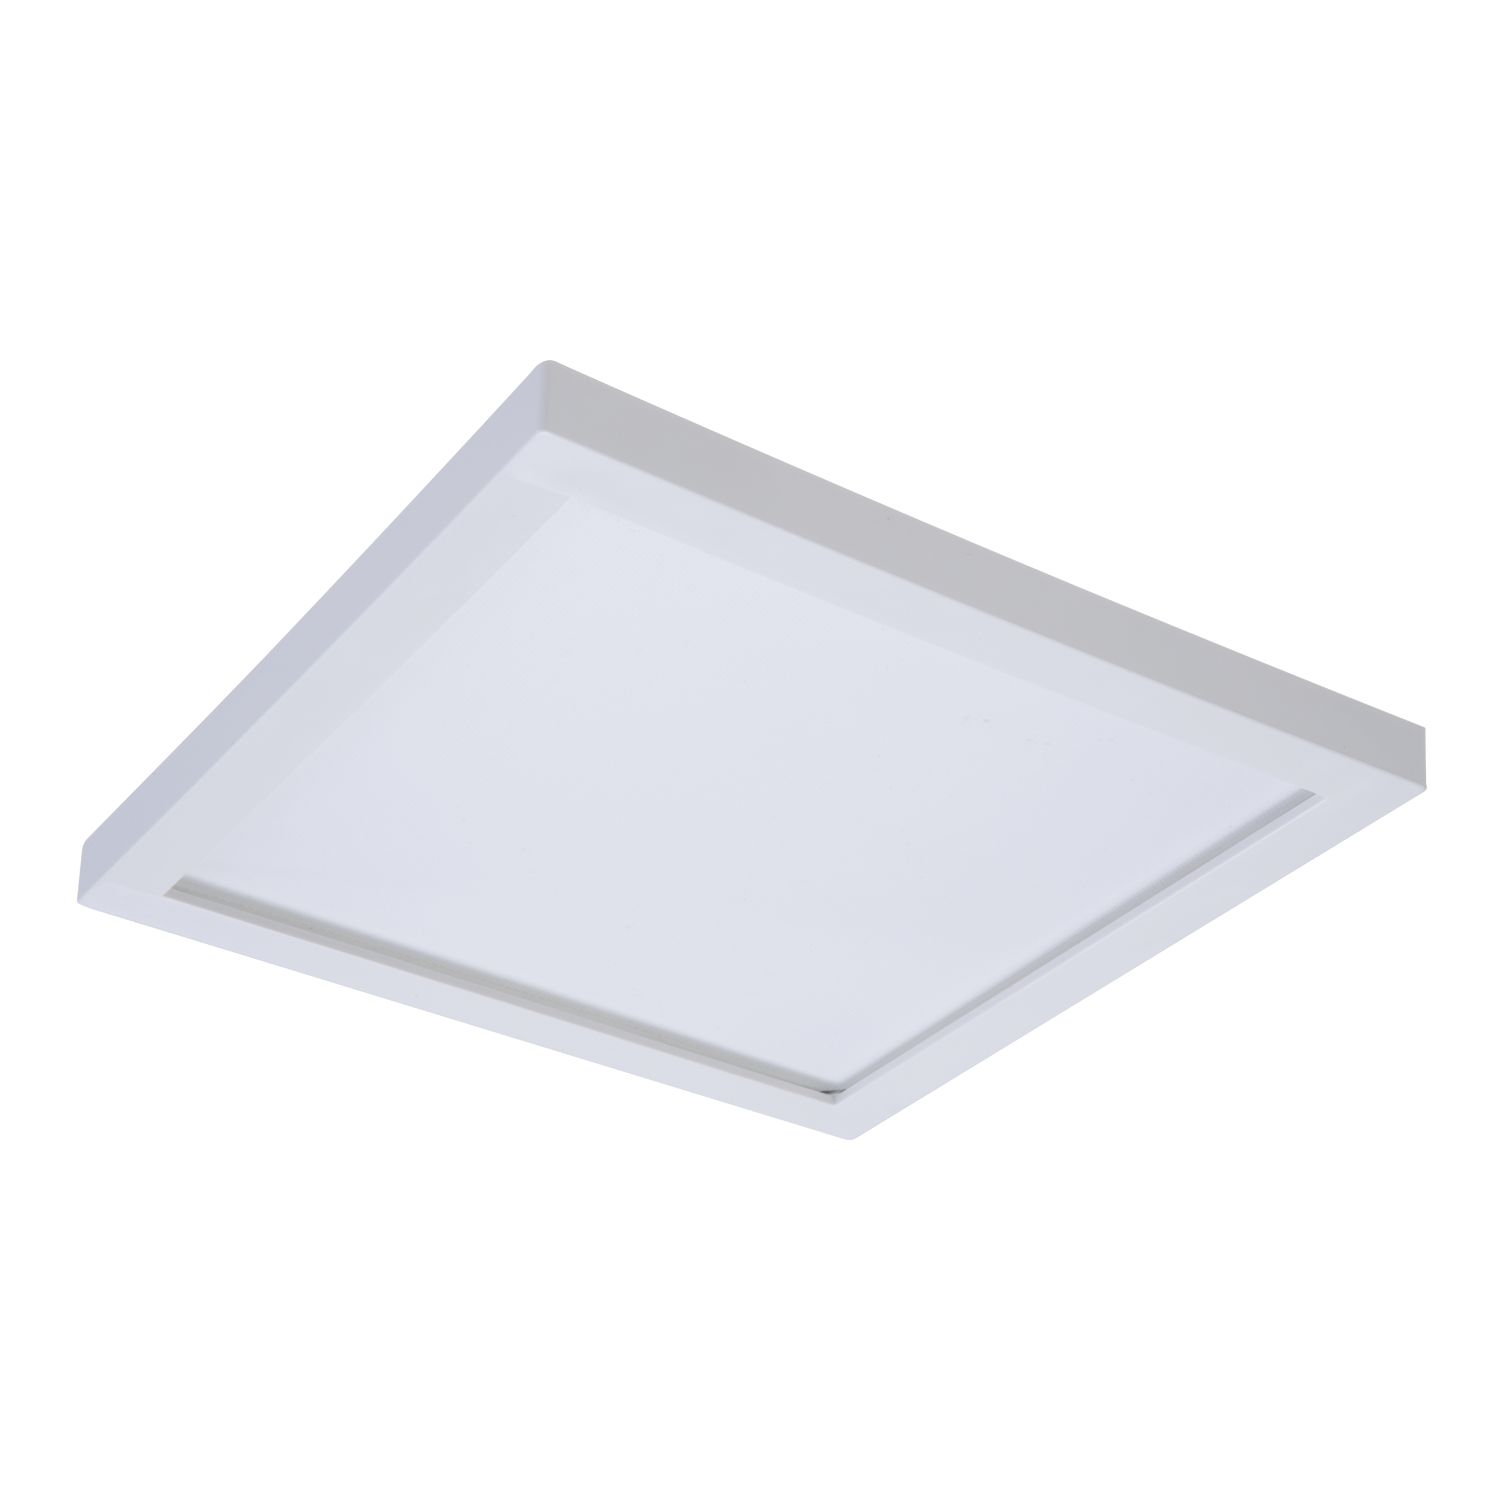 6W LED 3000k Surface Mounted Square Down Ceiling Panel Light for Home Office 